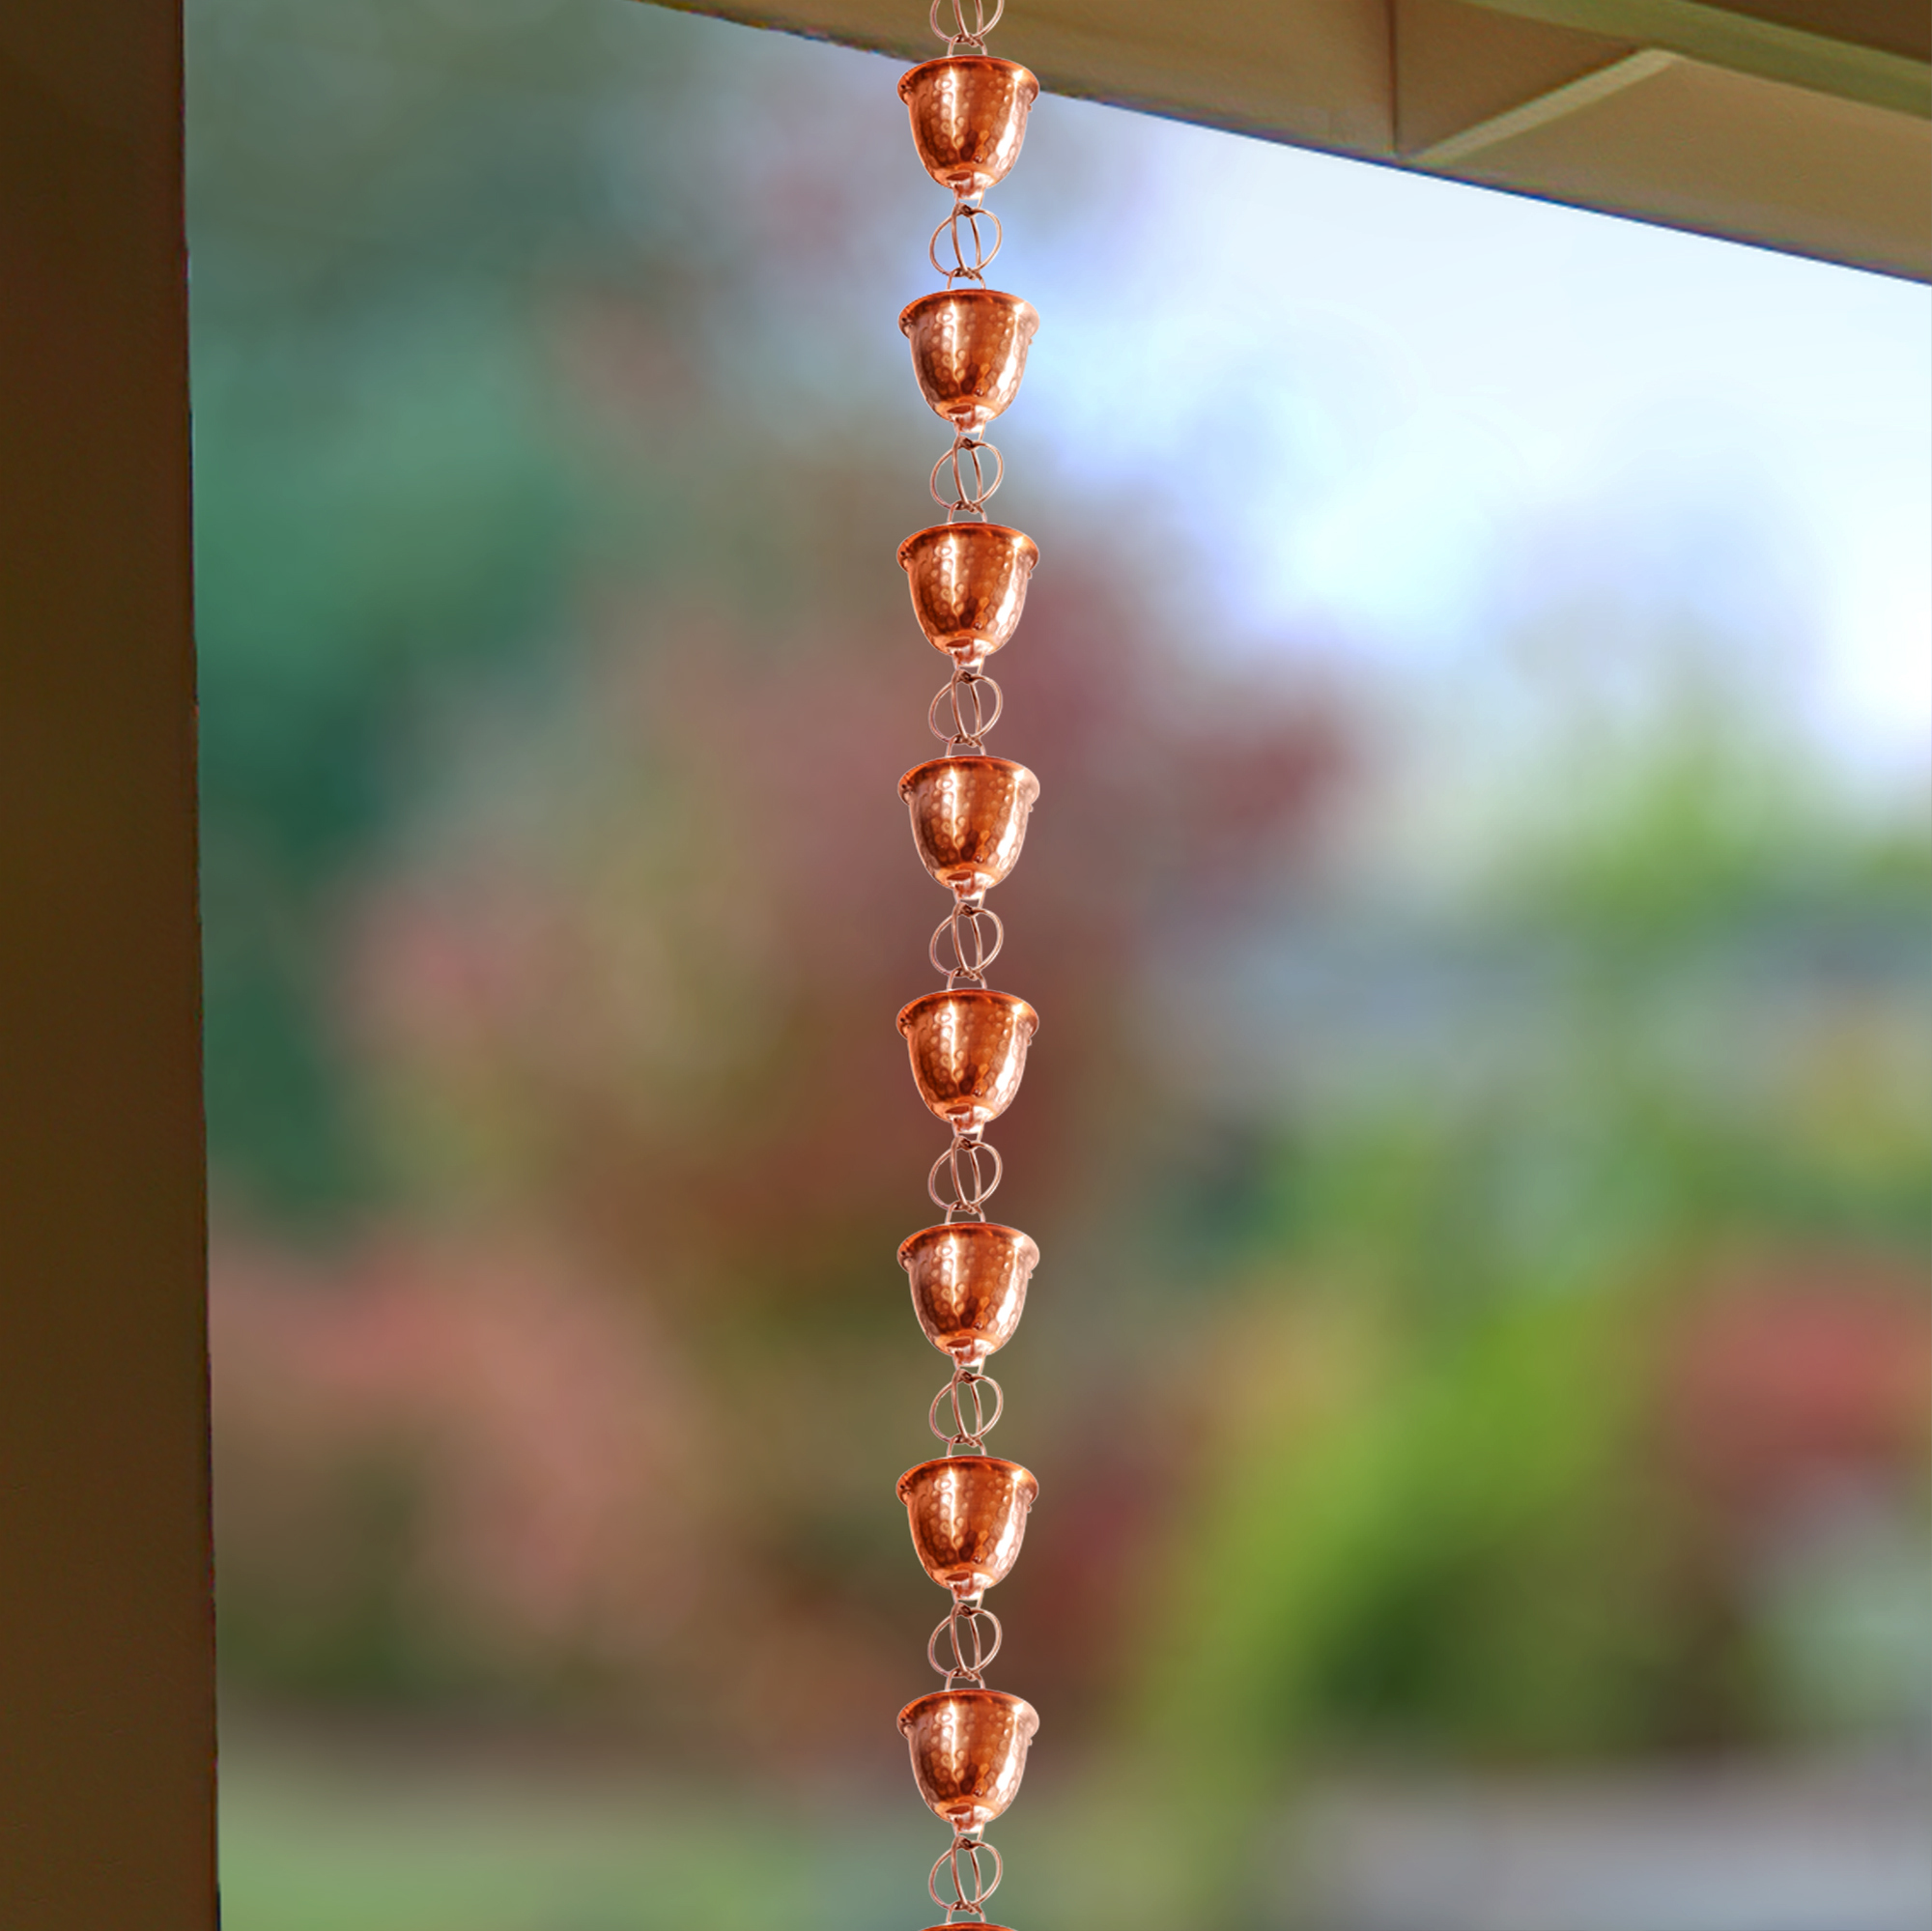 Monarch Rain Chains Pure Copper Hammered Cup Rain Chain Replacement Downspout for Gutters, 8.5 ft L - image 3 of 10